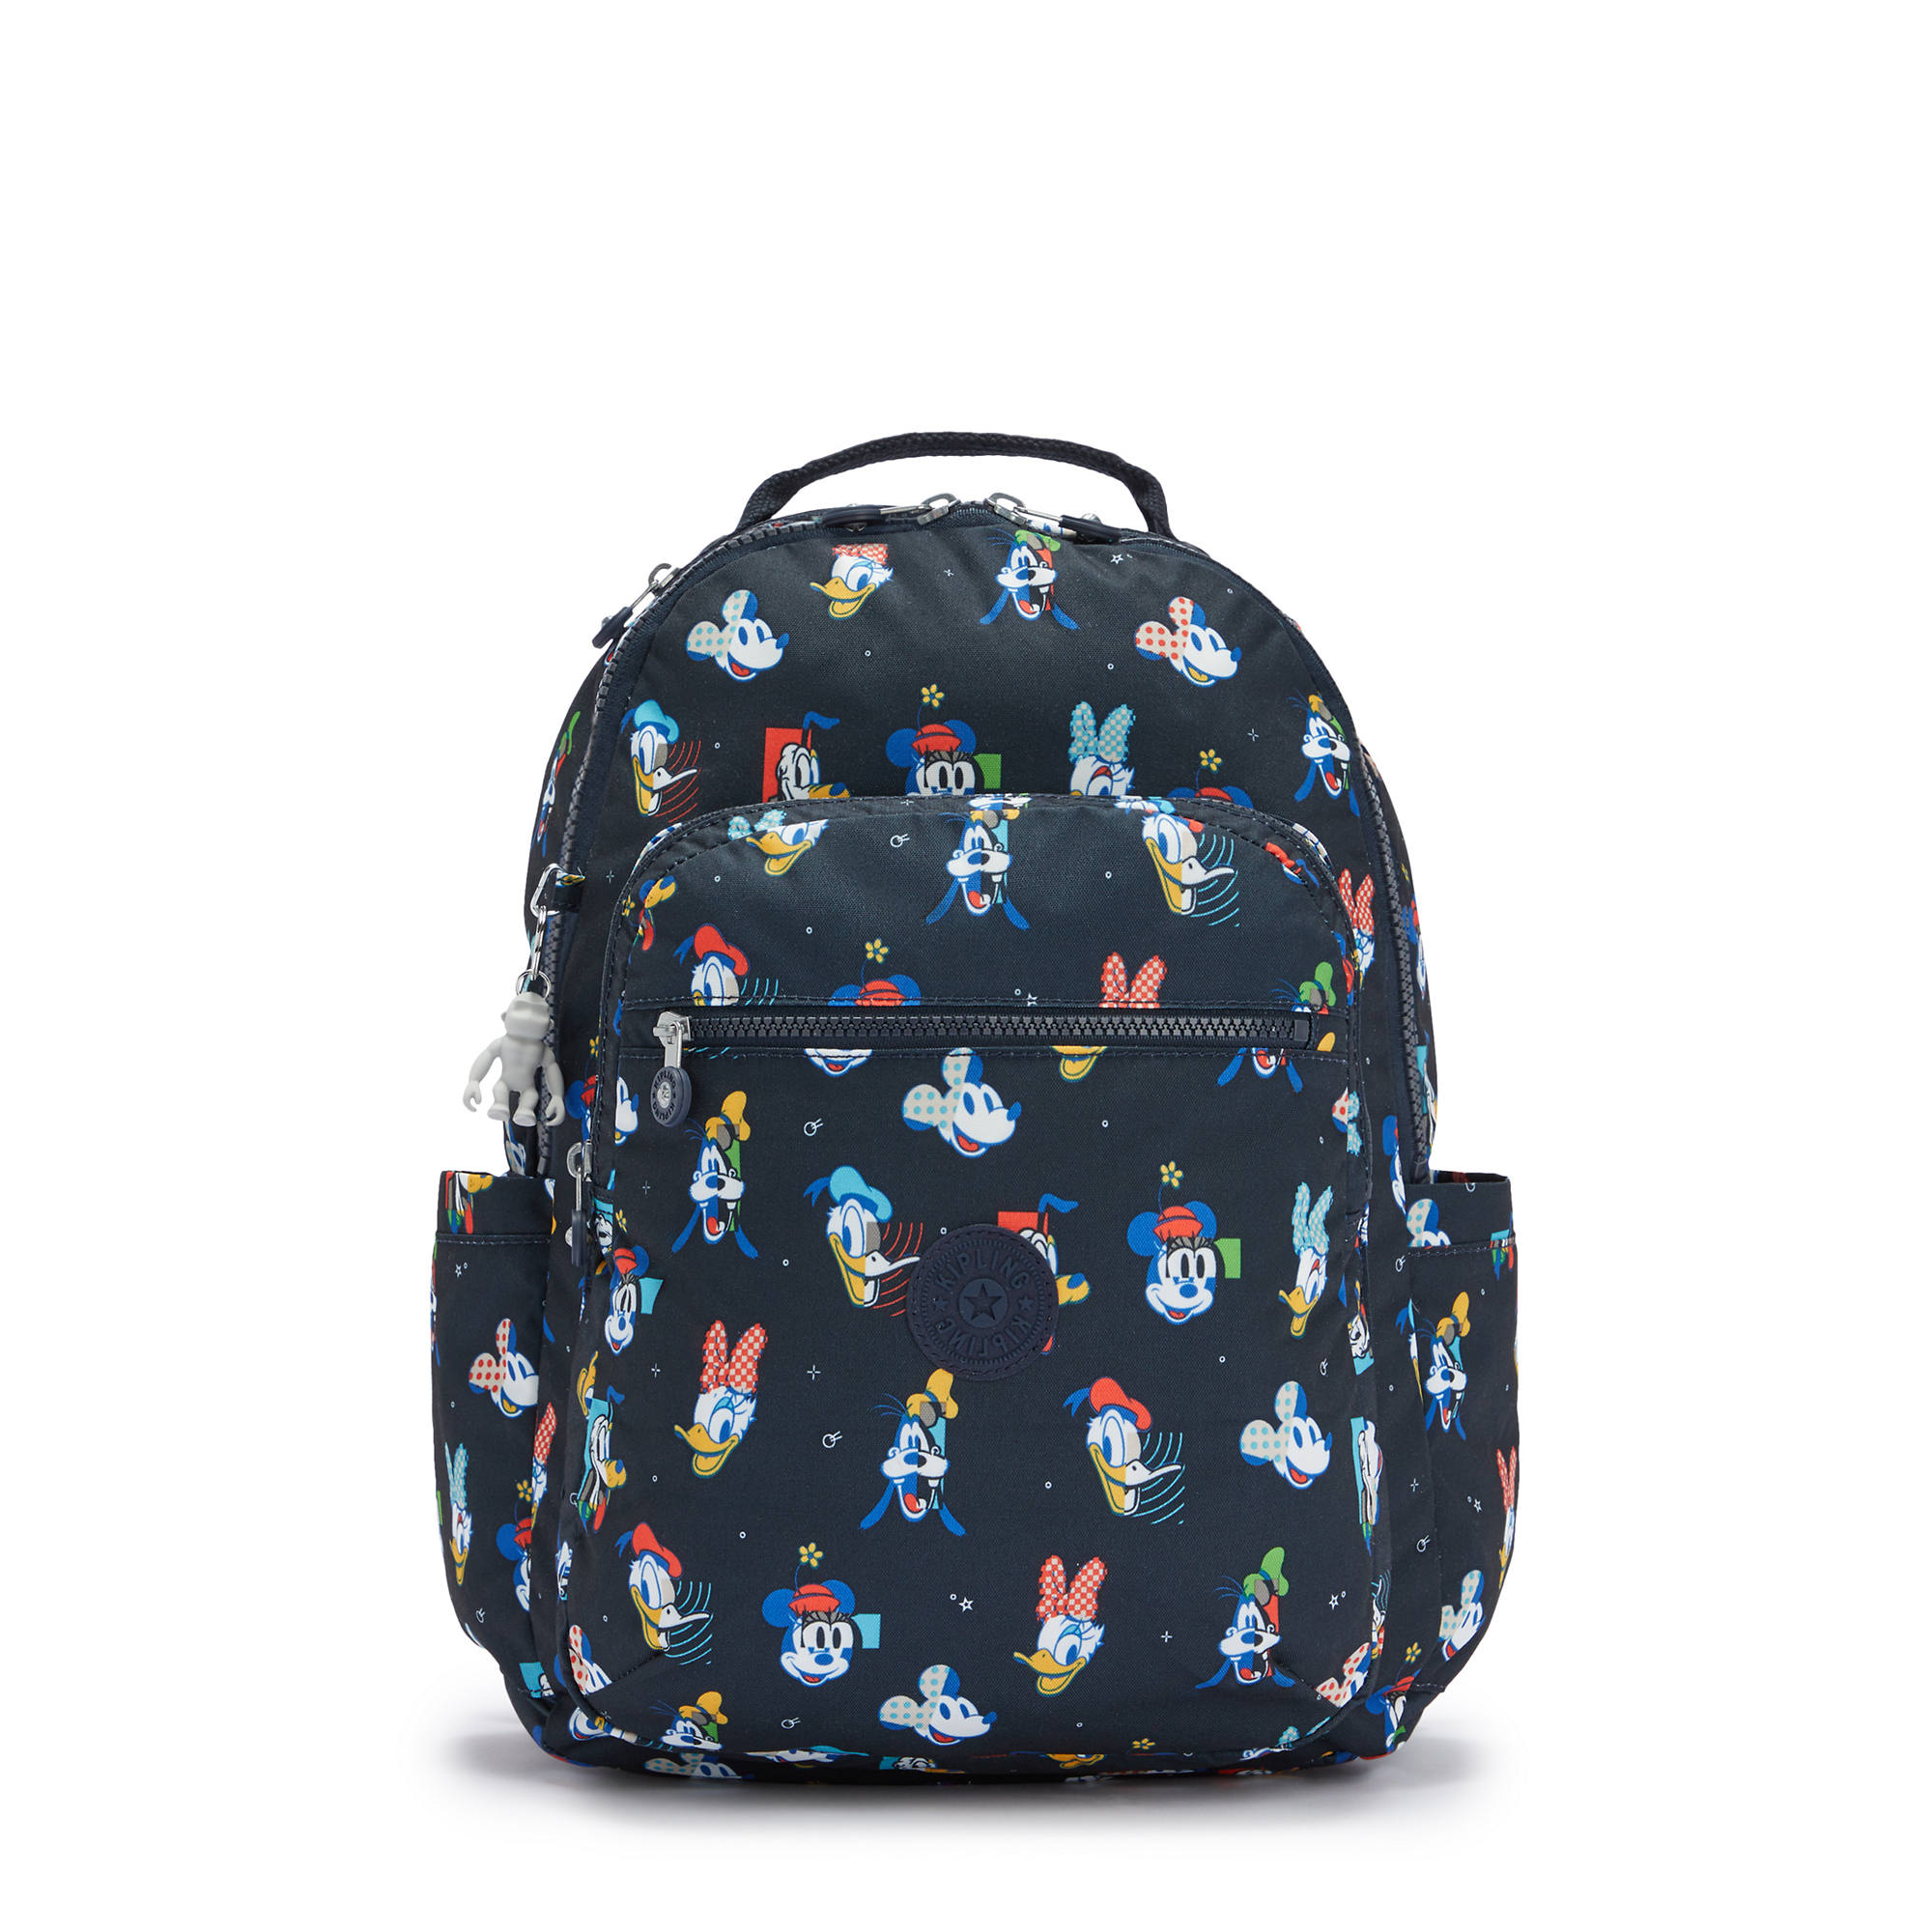 The Mickey And Friends Kipling Collection Has Sensational Style